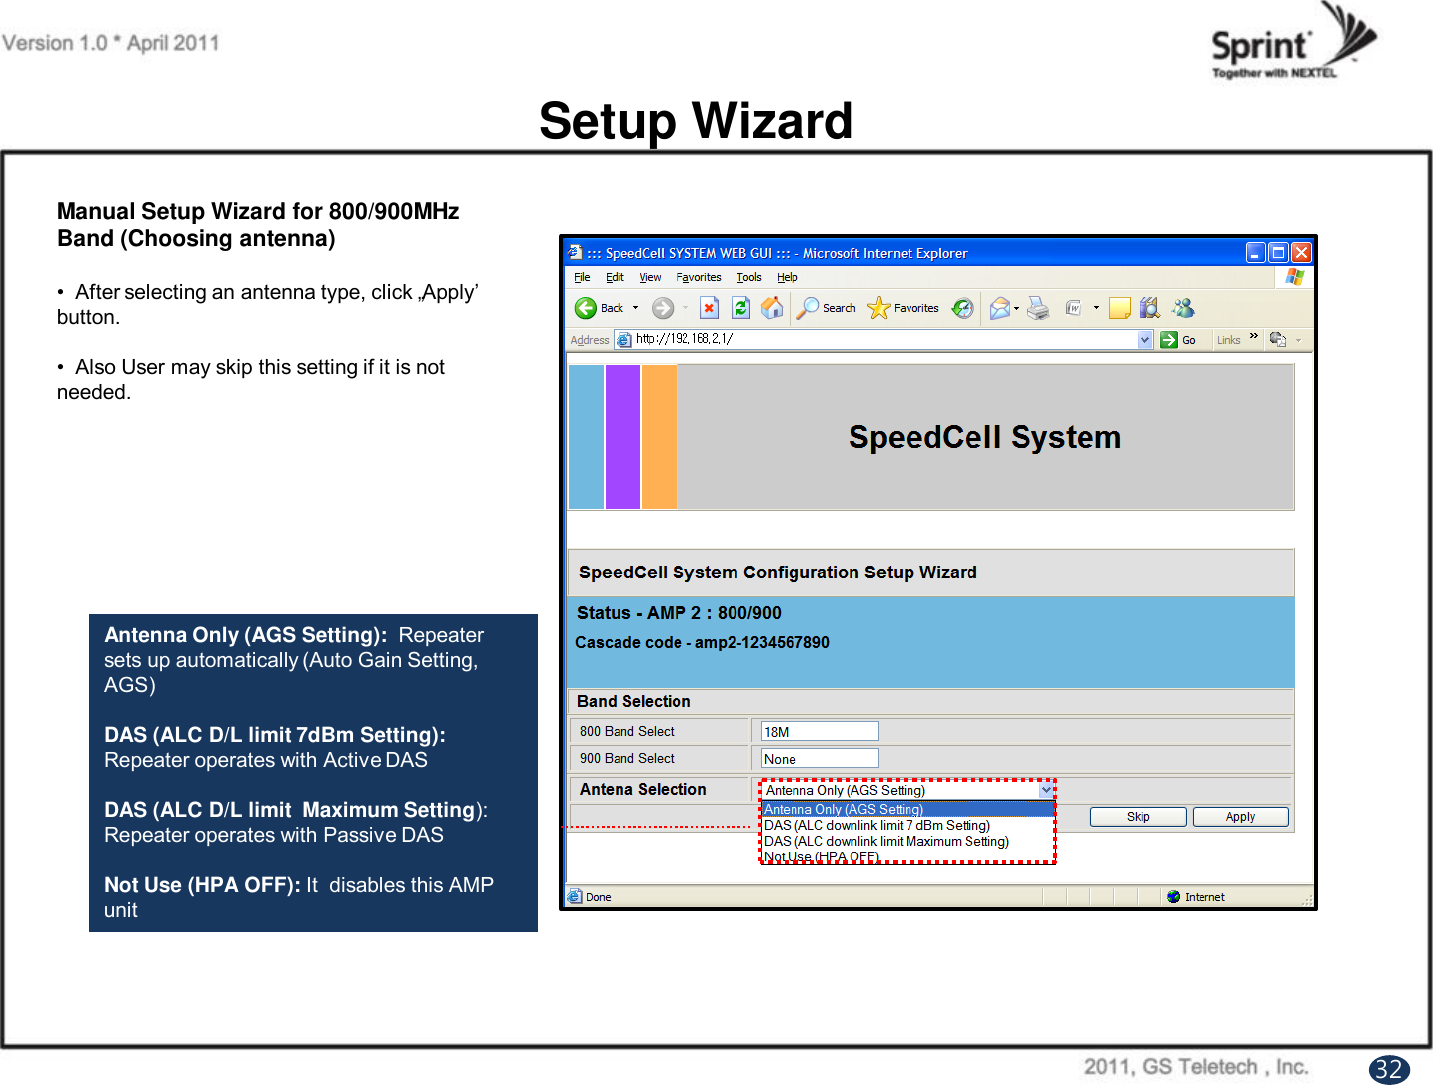 Setup WizardManual Setup Wizard for 800/900MHz Band (Choosing antenna)•  After selecting an antenna type, click „Apply‟ button.•  Also User may skip this setting if it is not needed. Antenna Only (AGS Setting):  Repeater sets up automatically (Auto Gain Setting, AGS)DAS (ALC D/L limit 7dBm Setting): Repeater operates with Active DASDAS (ALC D/L limit  Maximum Setting): Repeater operates with Passive DASNot Use (HPA OFF): It  disables this AMP unit32